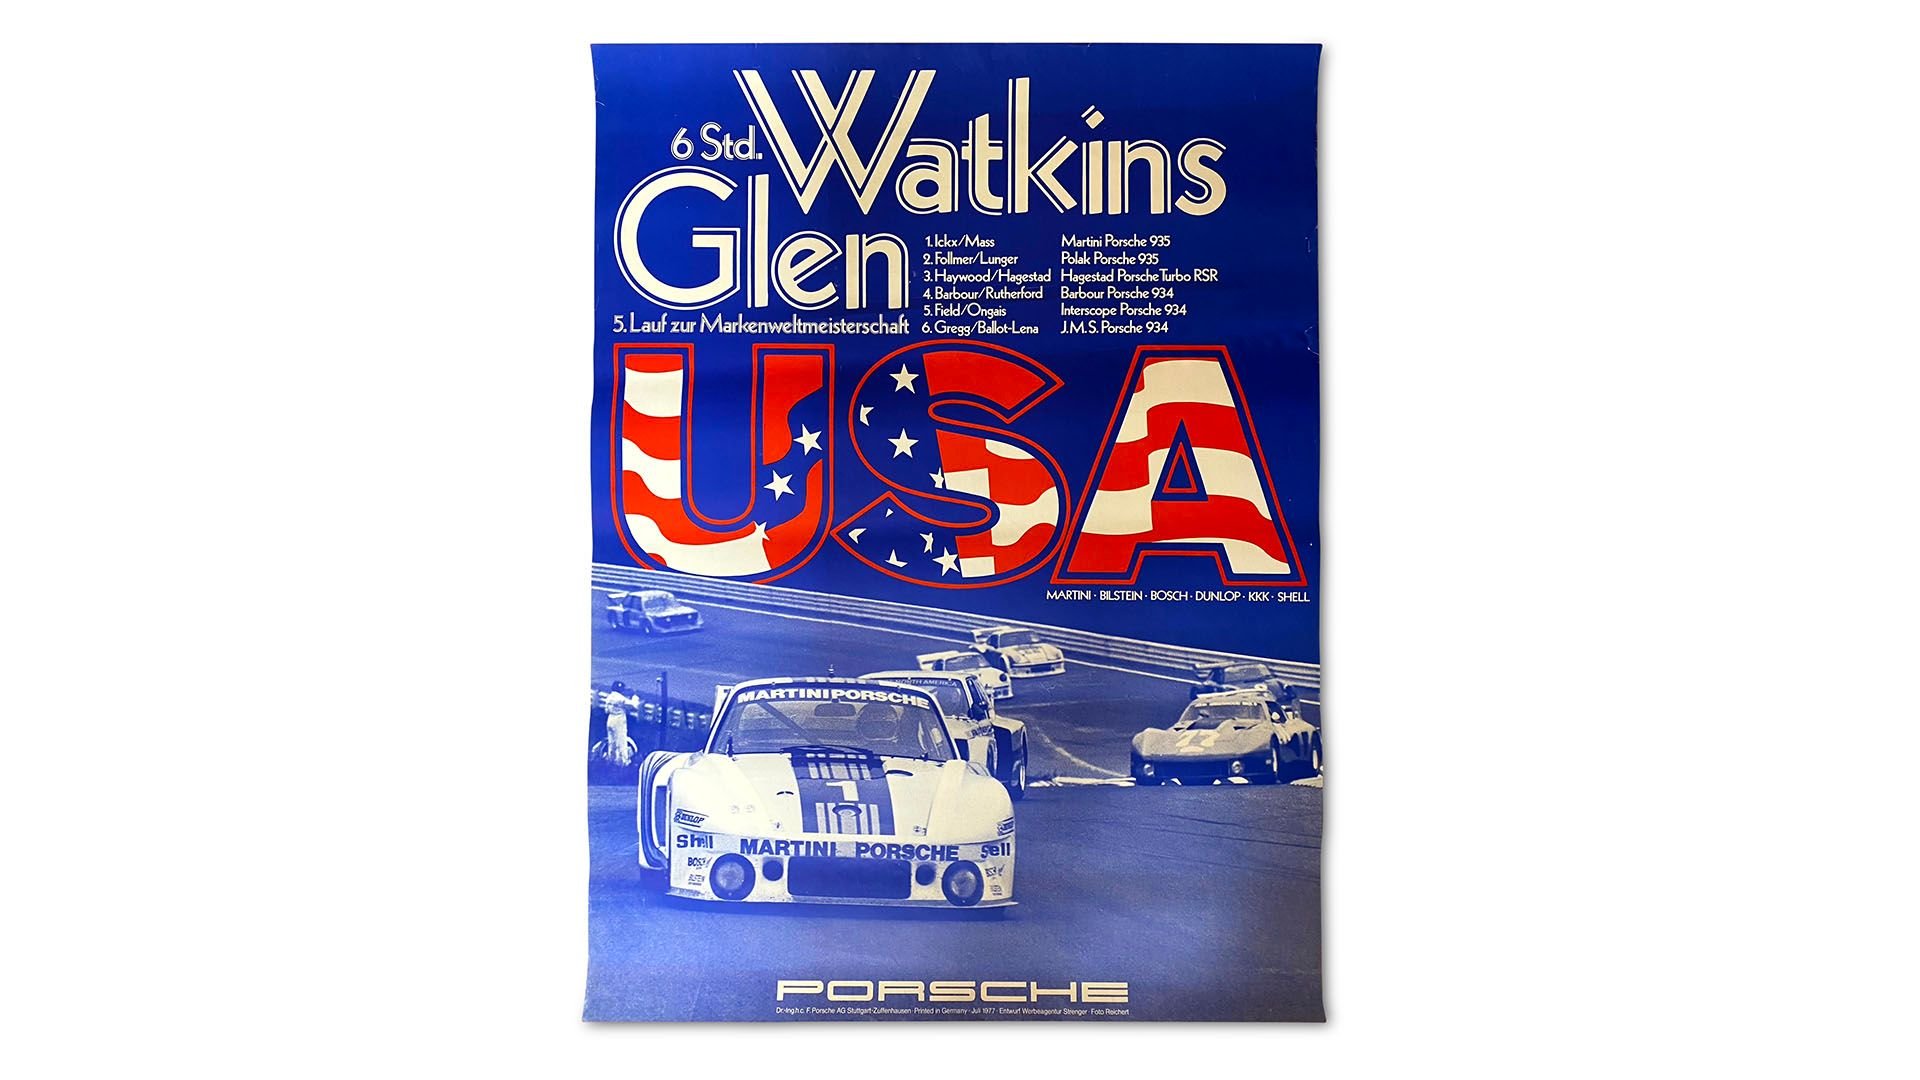 For Sale Group of 17 Porsche Factory Racing (934, 935 911 SC Rallye) and Advertising (928) Posters 1977-1979